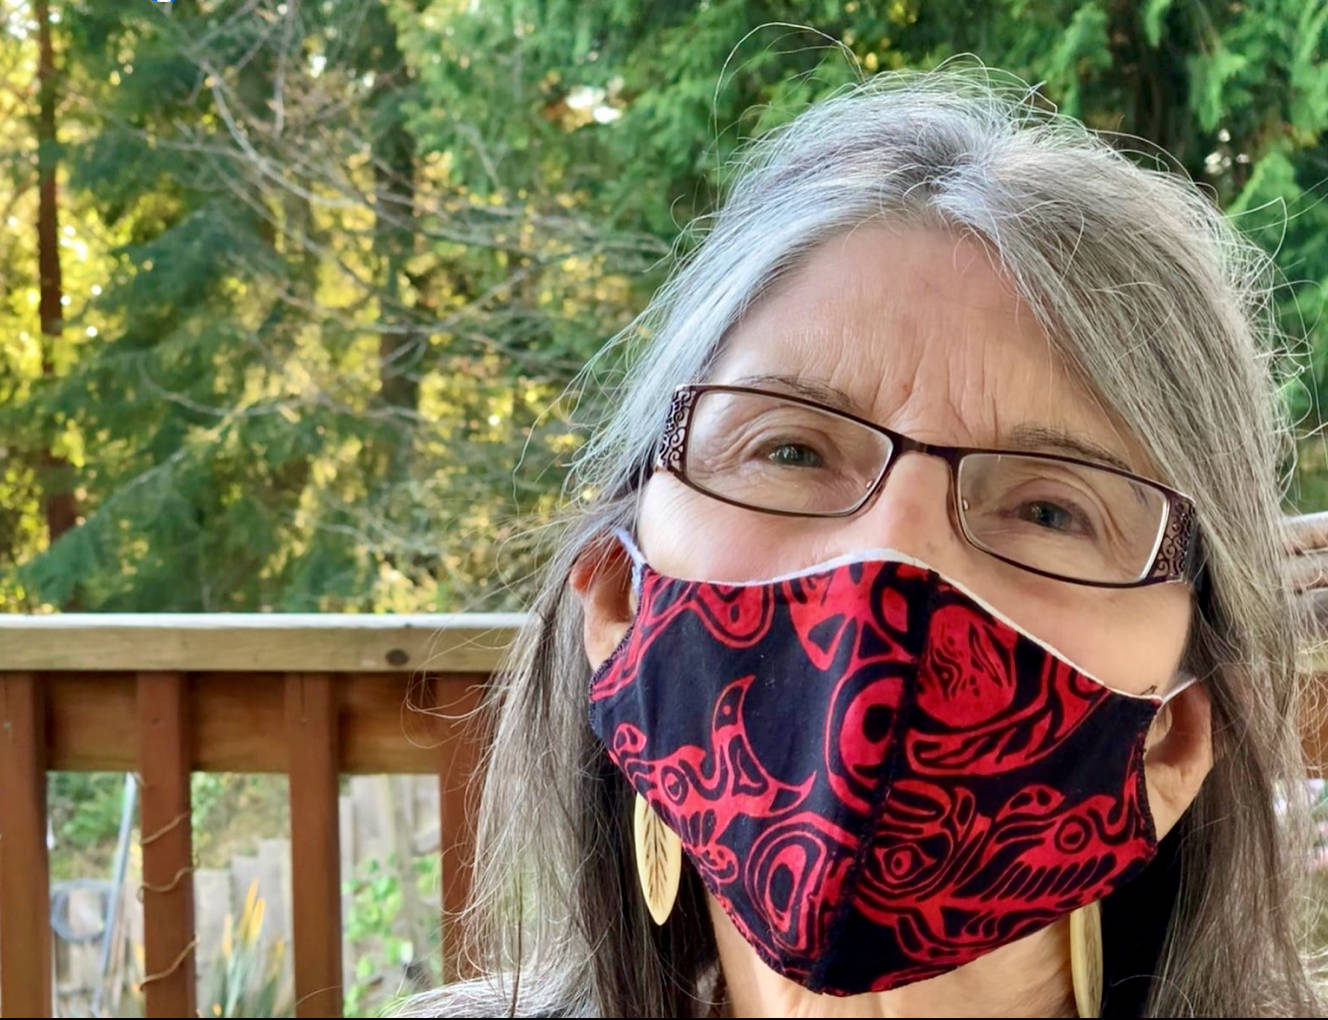 Nancy McPherson, 74, a Suquamish tribal elder, died from injuries sustained while walking with her husband after both were hit by a vehicle, sheriff’s and tribal officials say. Courtesy photo